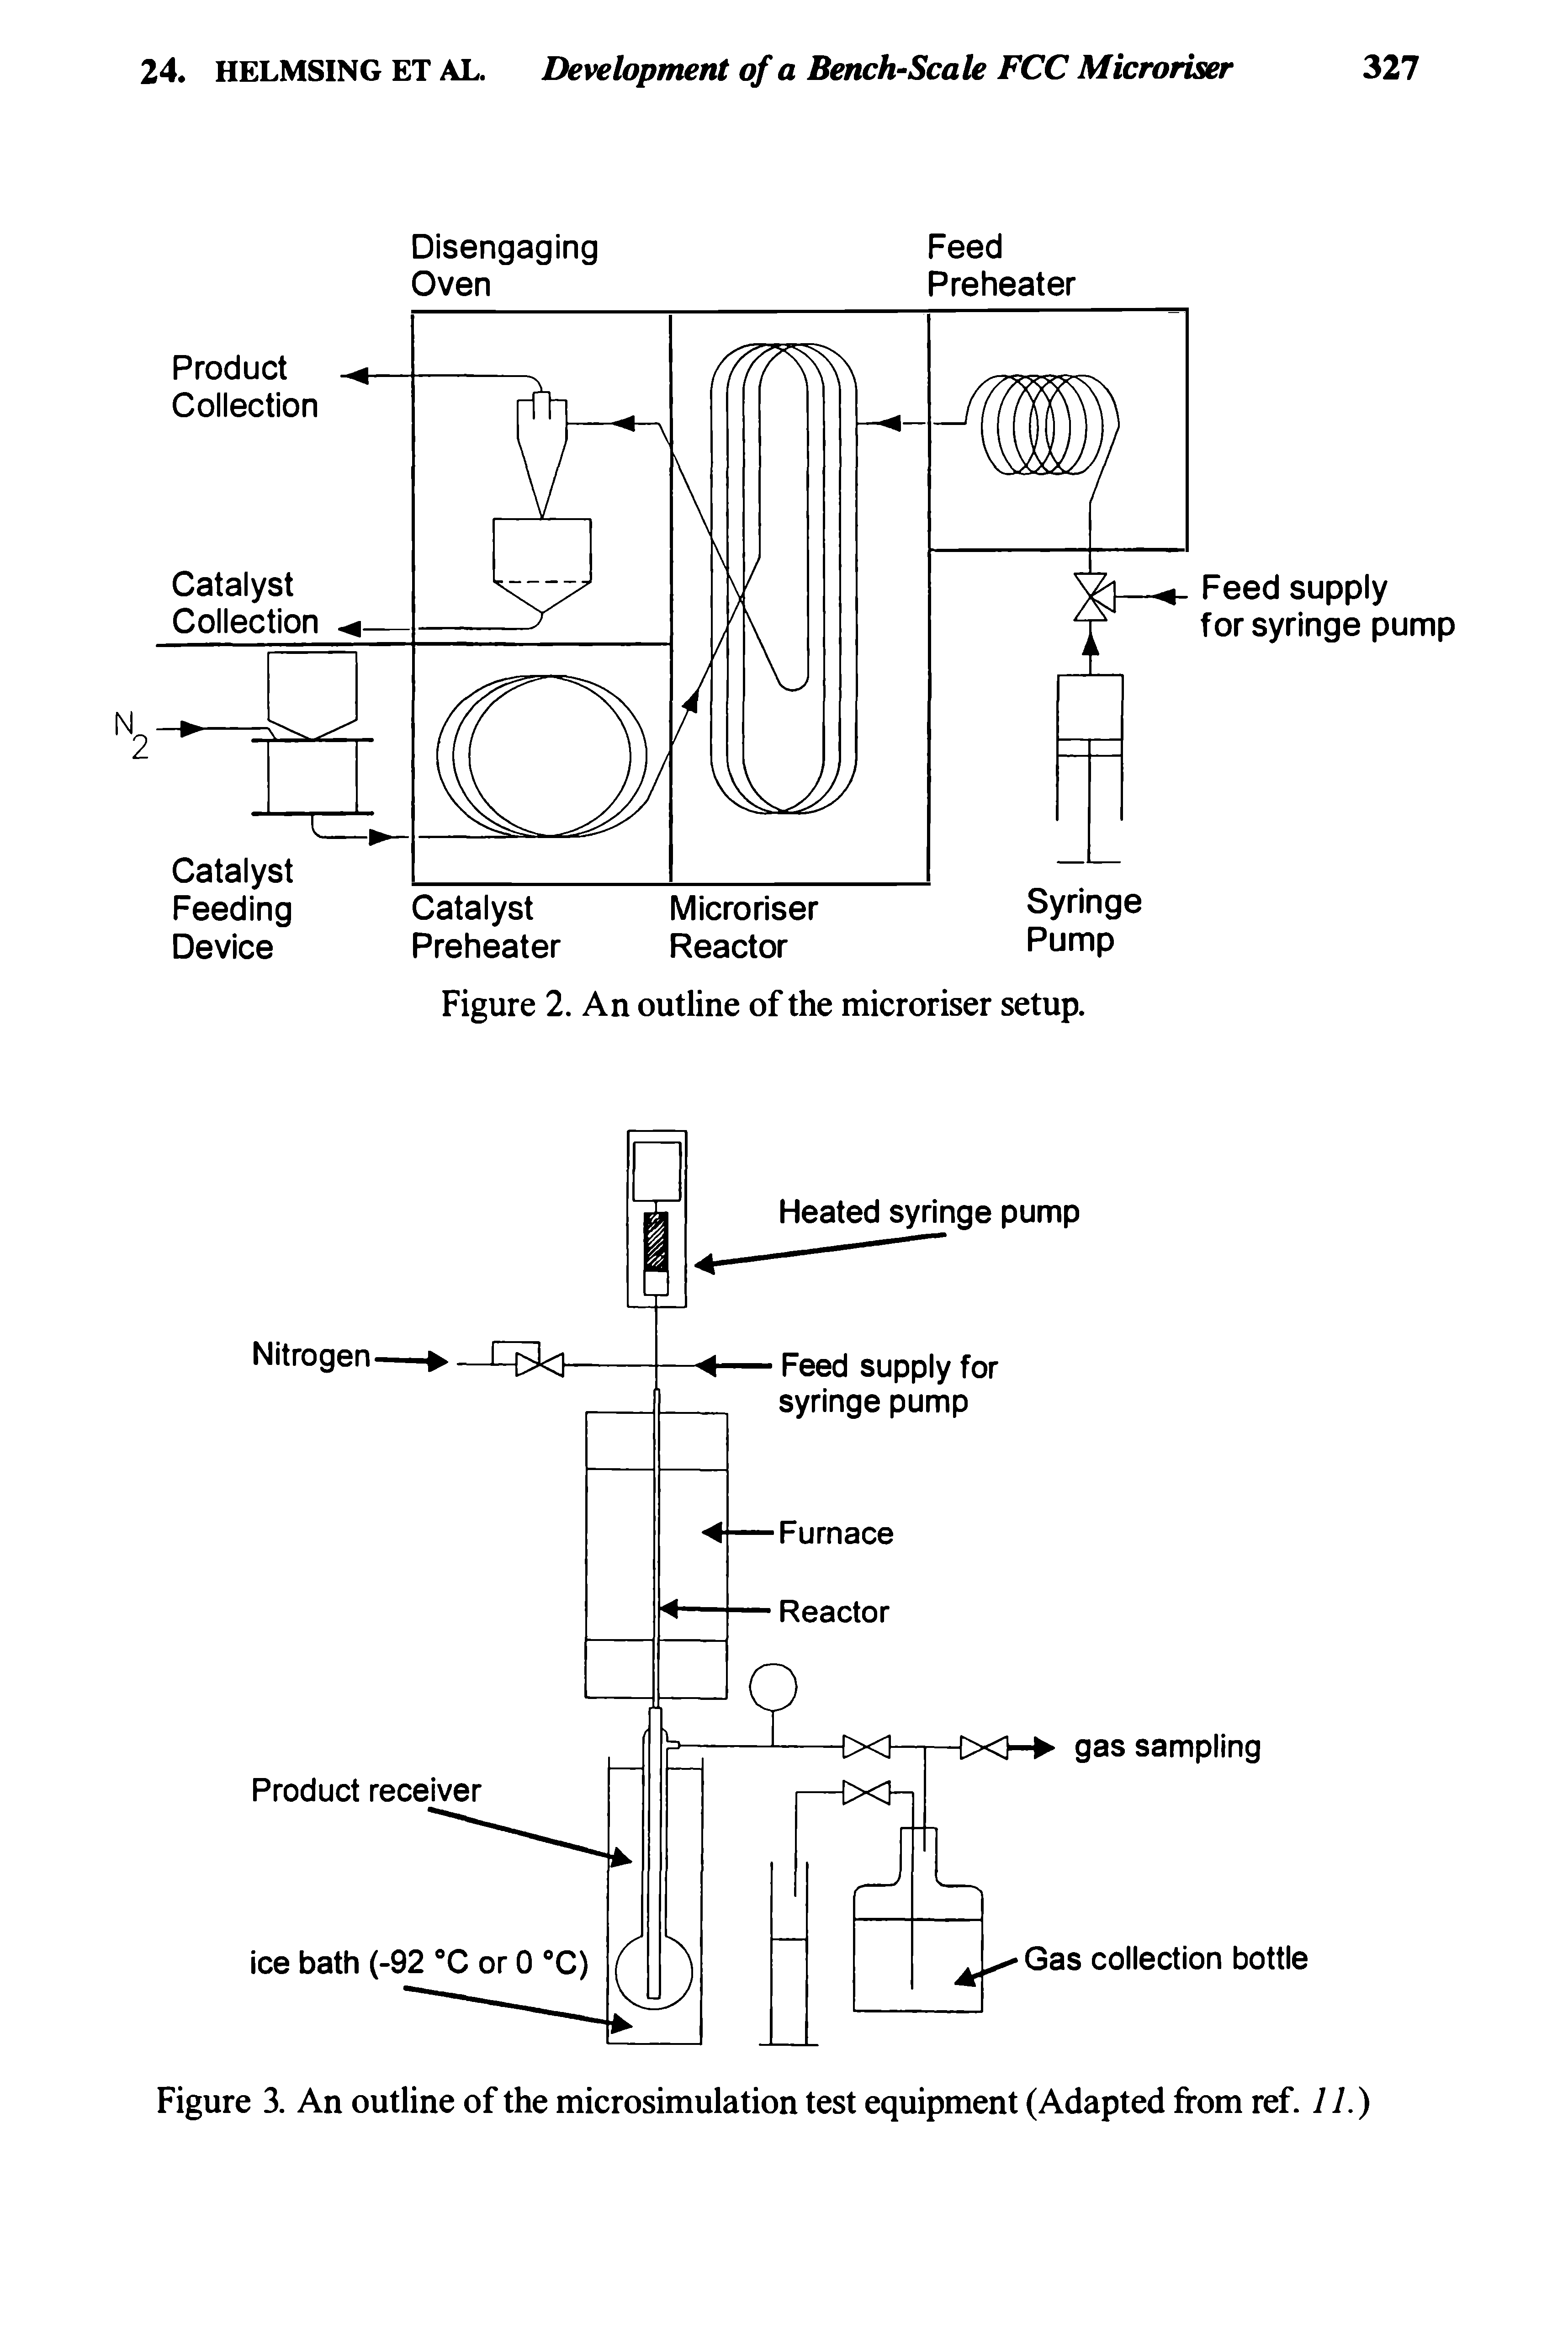 Figure 3. An outline of the microsimulation test equipment (Adapted from ref. 11.)...